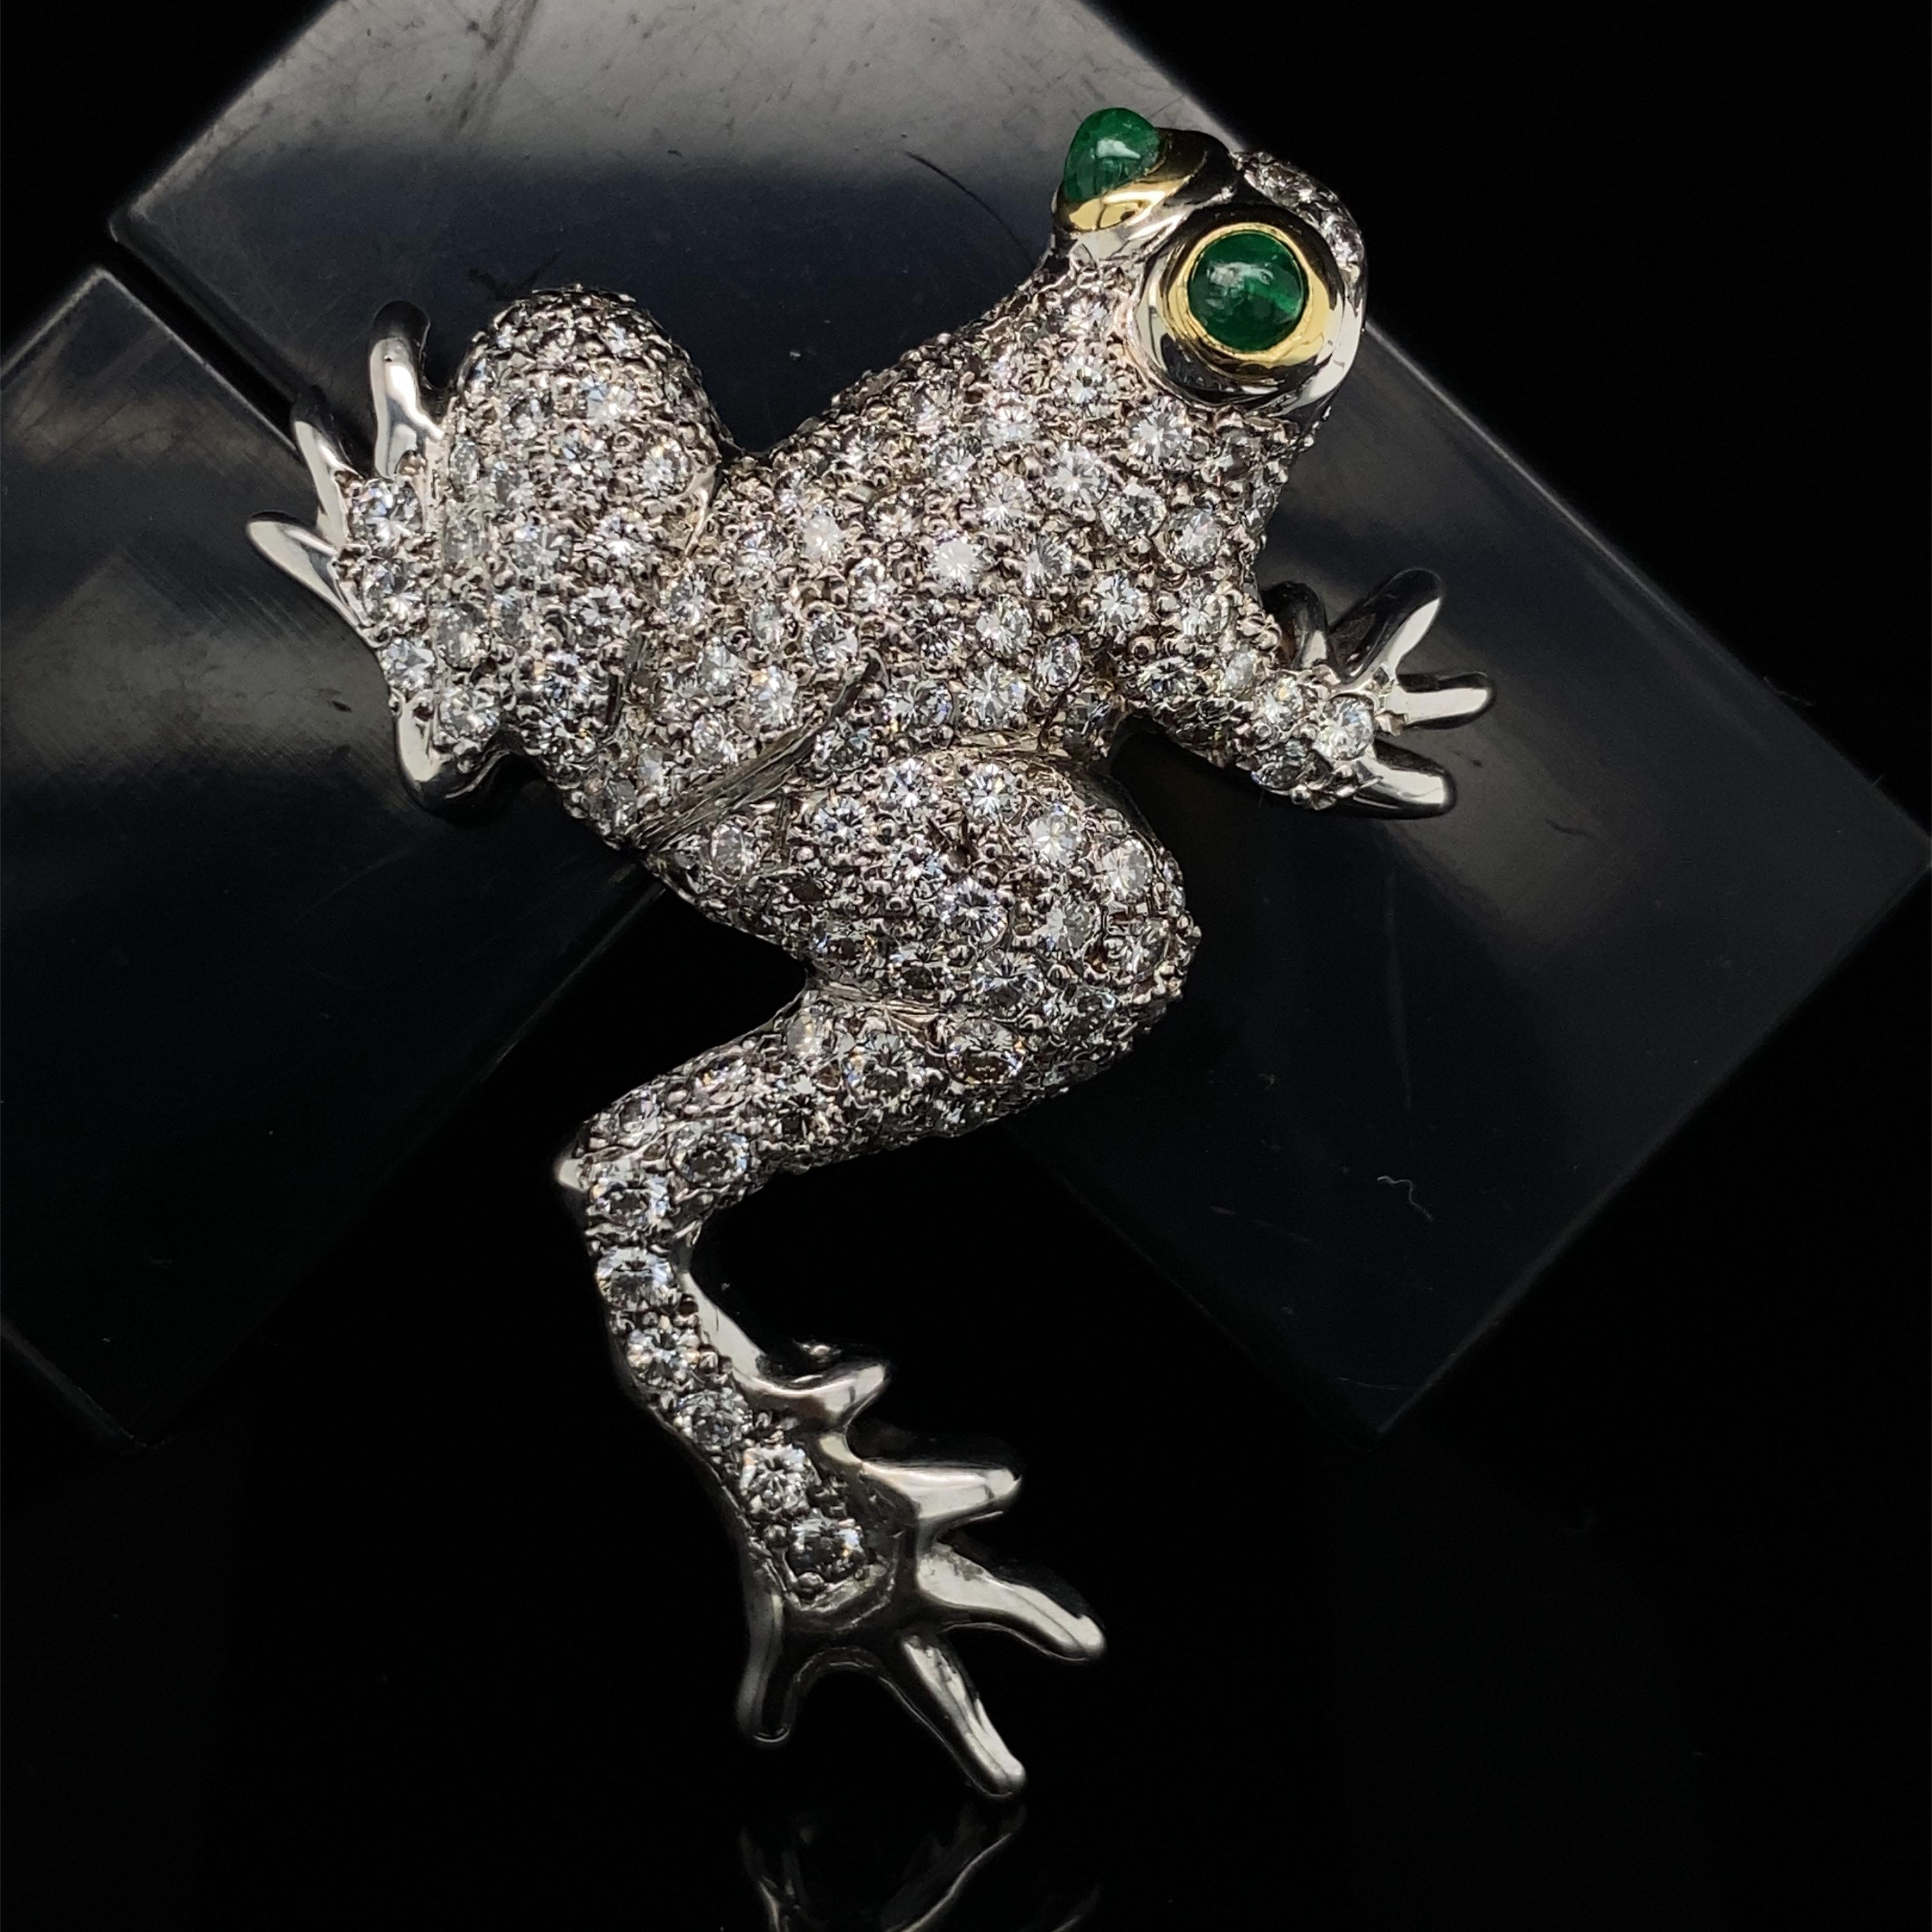 2.5 Carat Pavé Diamond Frog Pendant in White Gold on Chrome Diopside Bead Chain In Good Condition For Sale In Sherman Oaks, CA